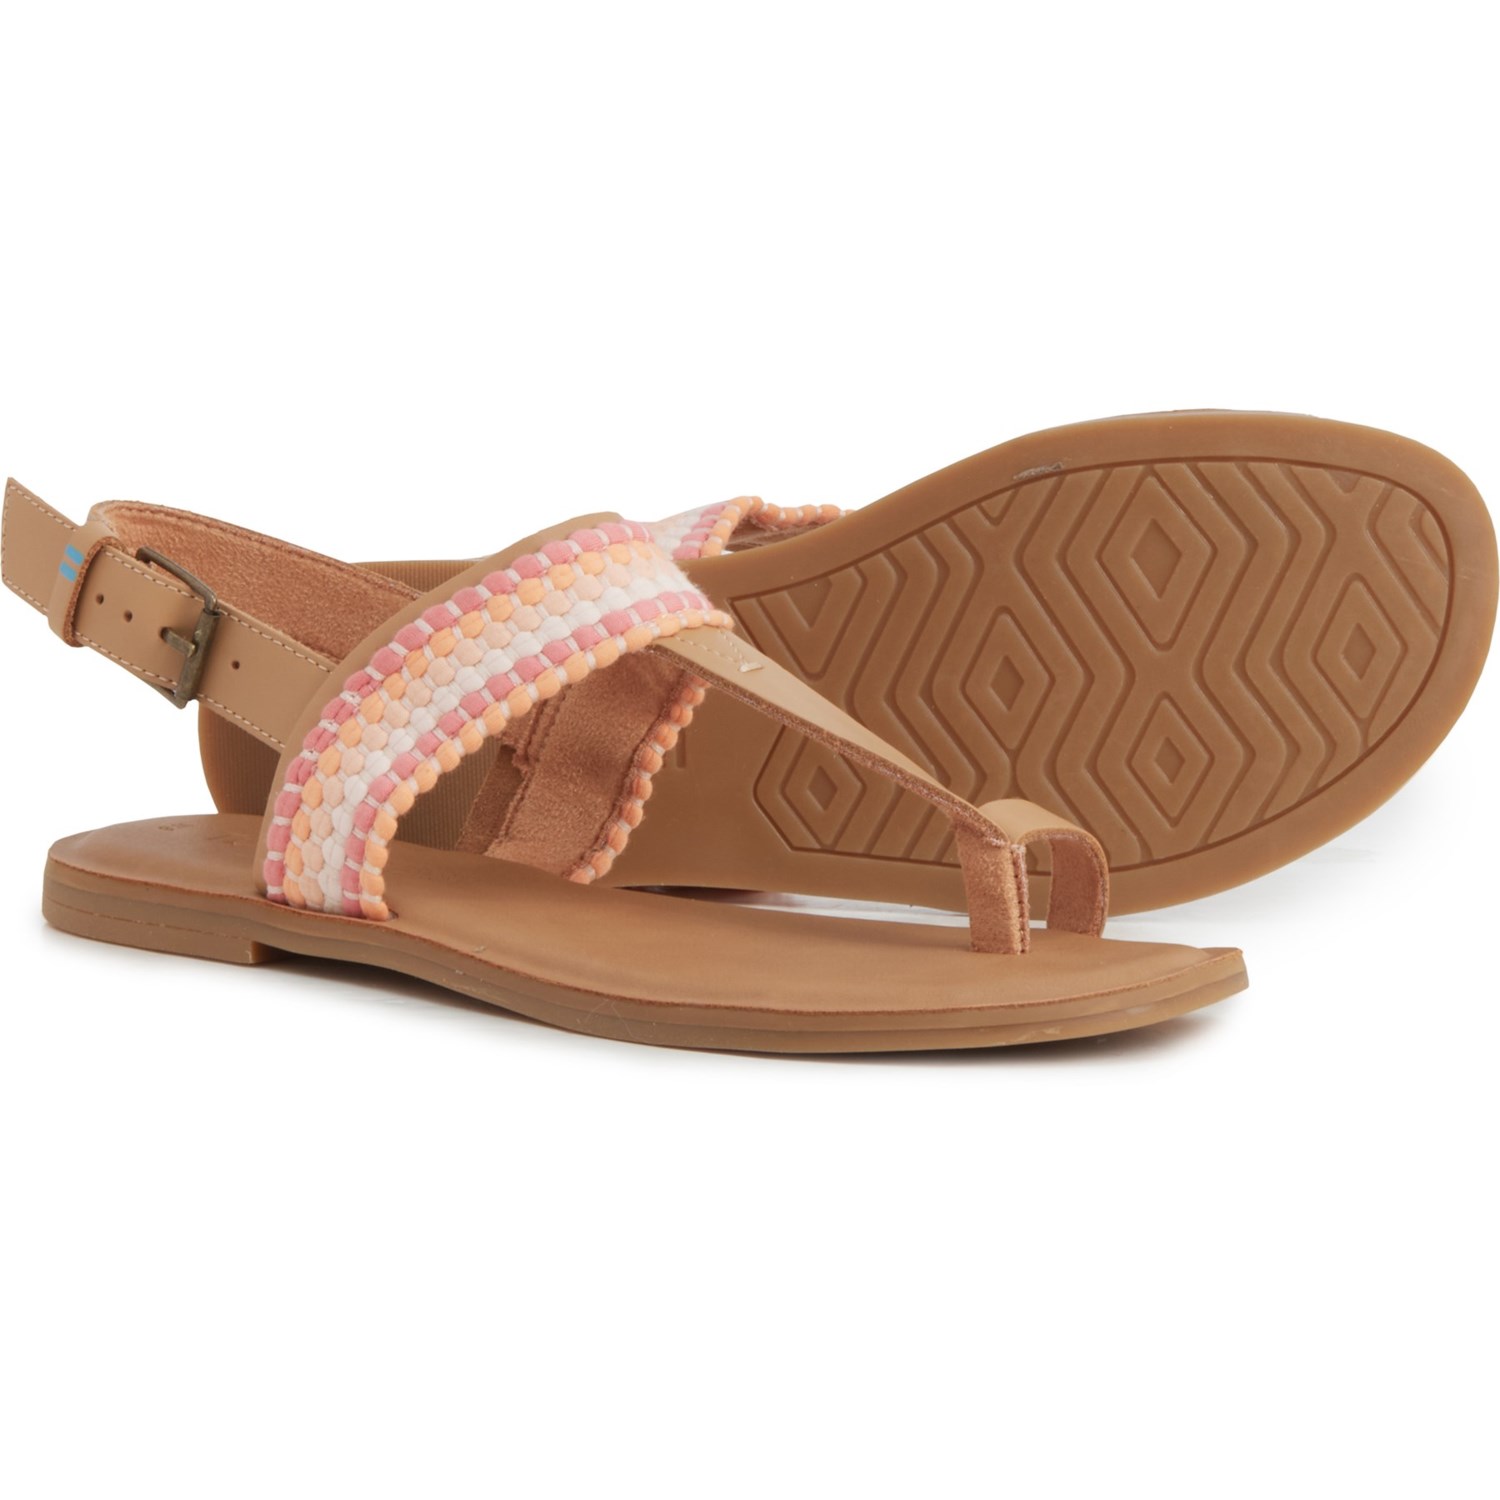 TOMS Bree Flat Sandals - Leather (For Women)